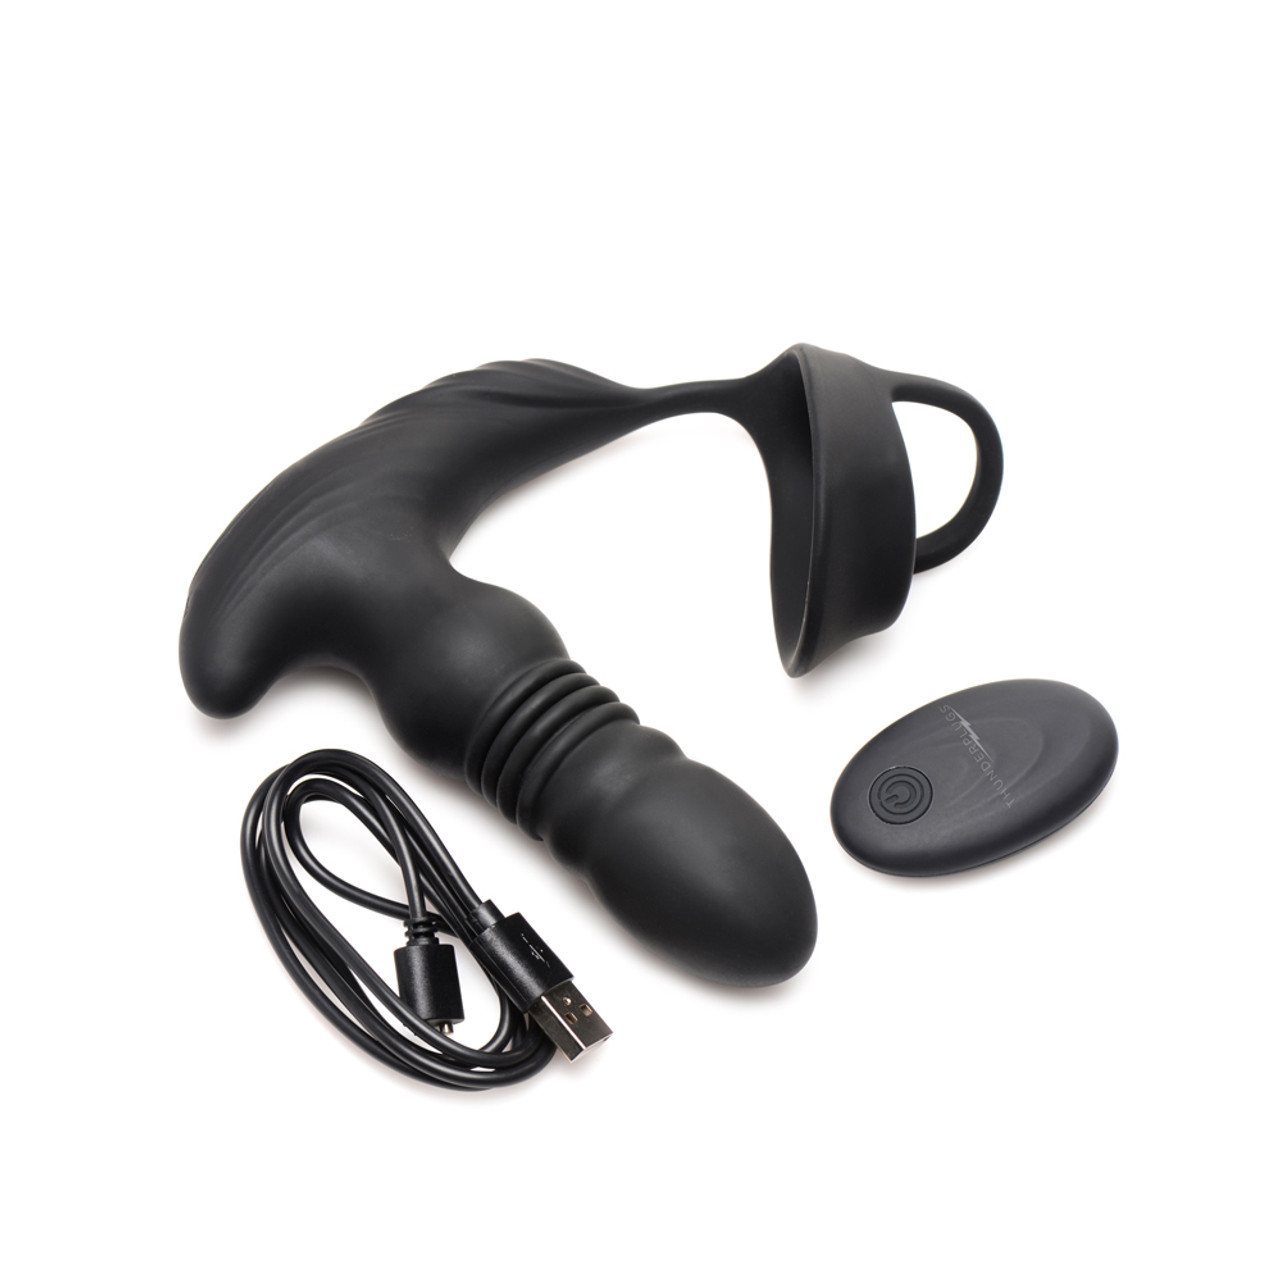 Buy the ThunderPlugs Thrusting 10-function Remote Control Rechargeable Vibrating Silicone Butt Plug with Cock